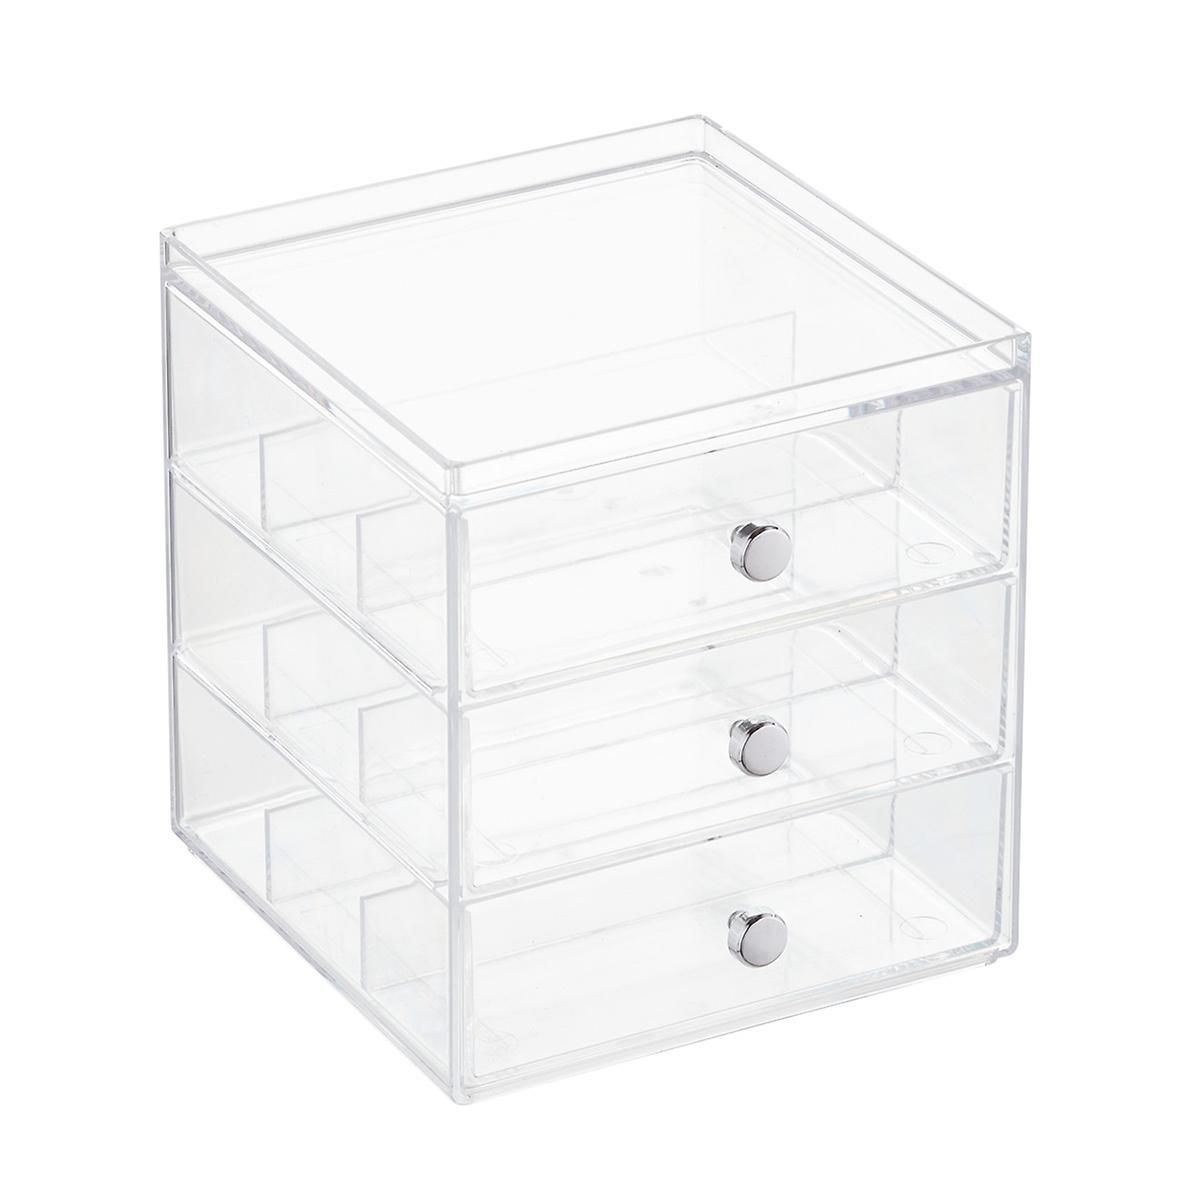 iDesign Clarity Makeup Storage Kit | The Container Store